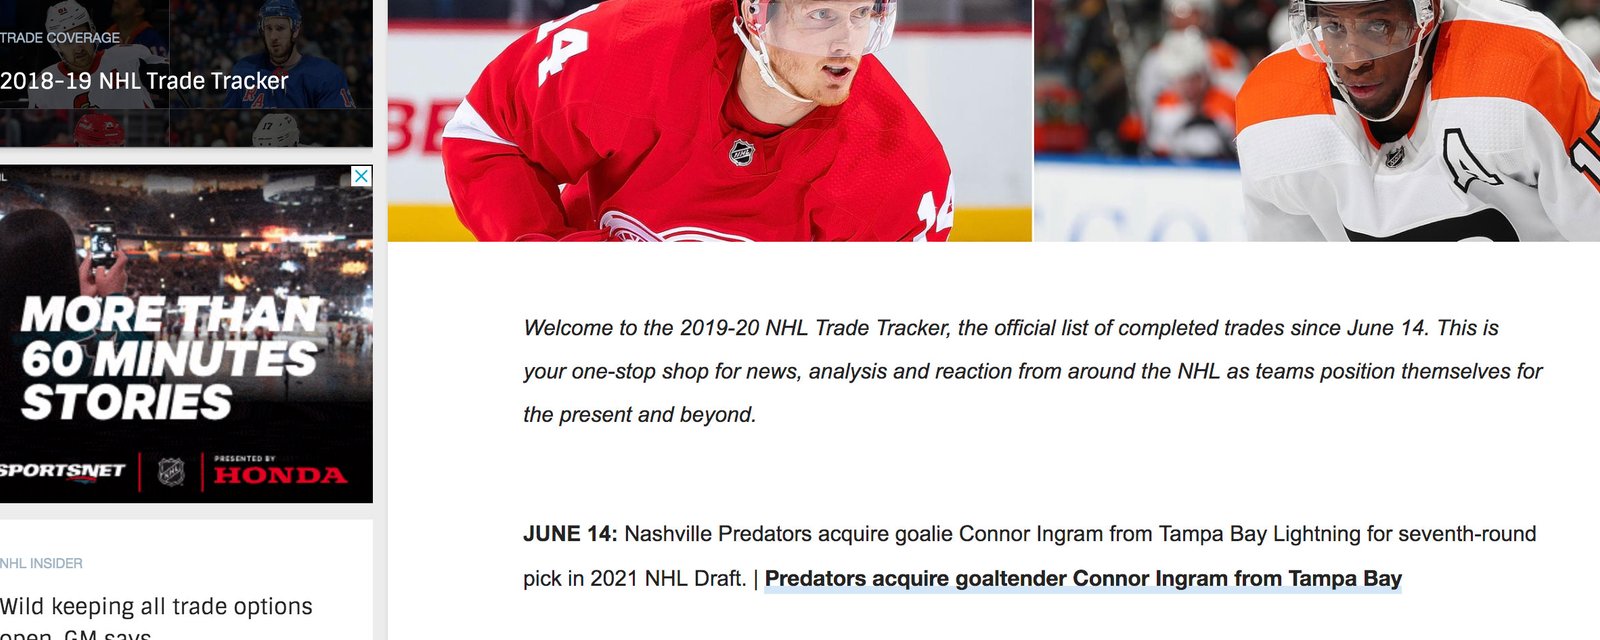 Poor guy learns he’s been traded from the NHL’s website! 